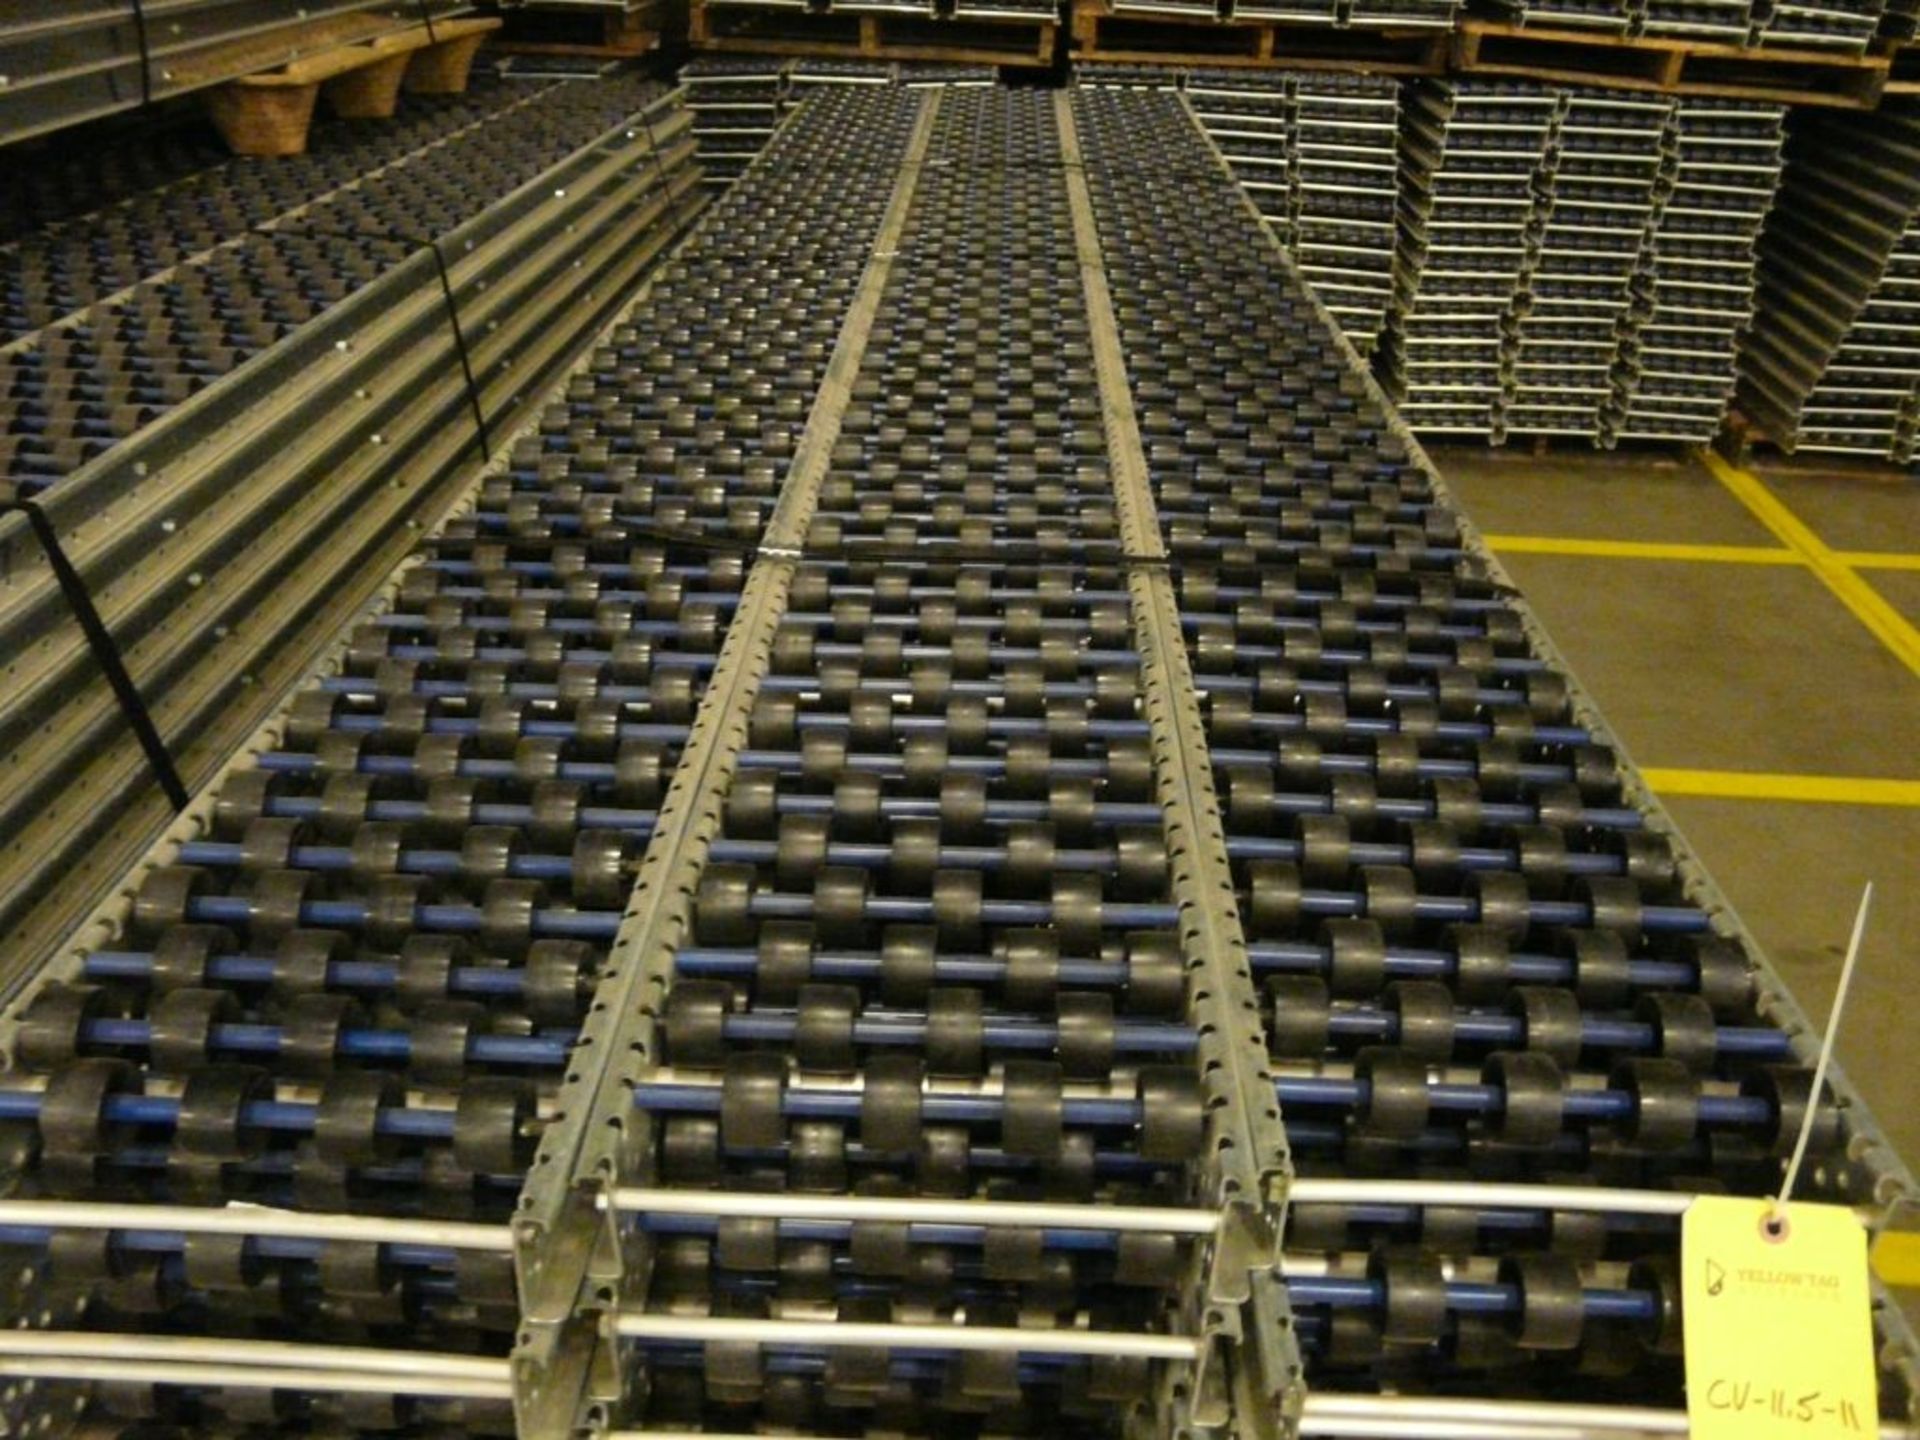 Lot of (90) SpanTrack Wheelbed Carton Flow Conveyors - 11.5'L x 11"W; Tag: 223614 - $30 Lot - Image 3 of 4